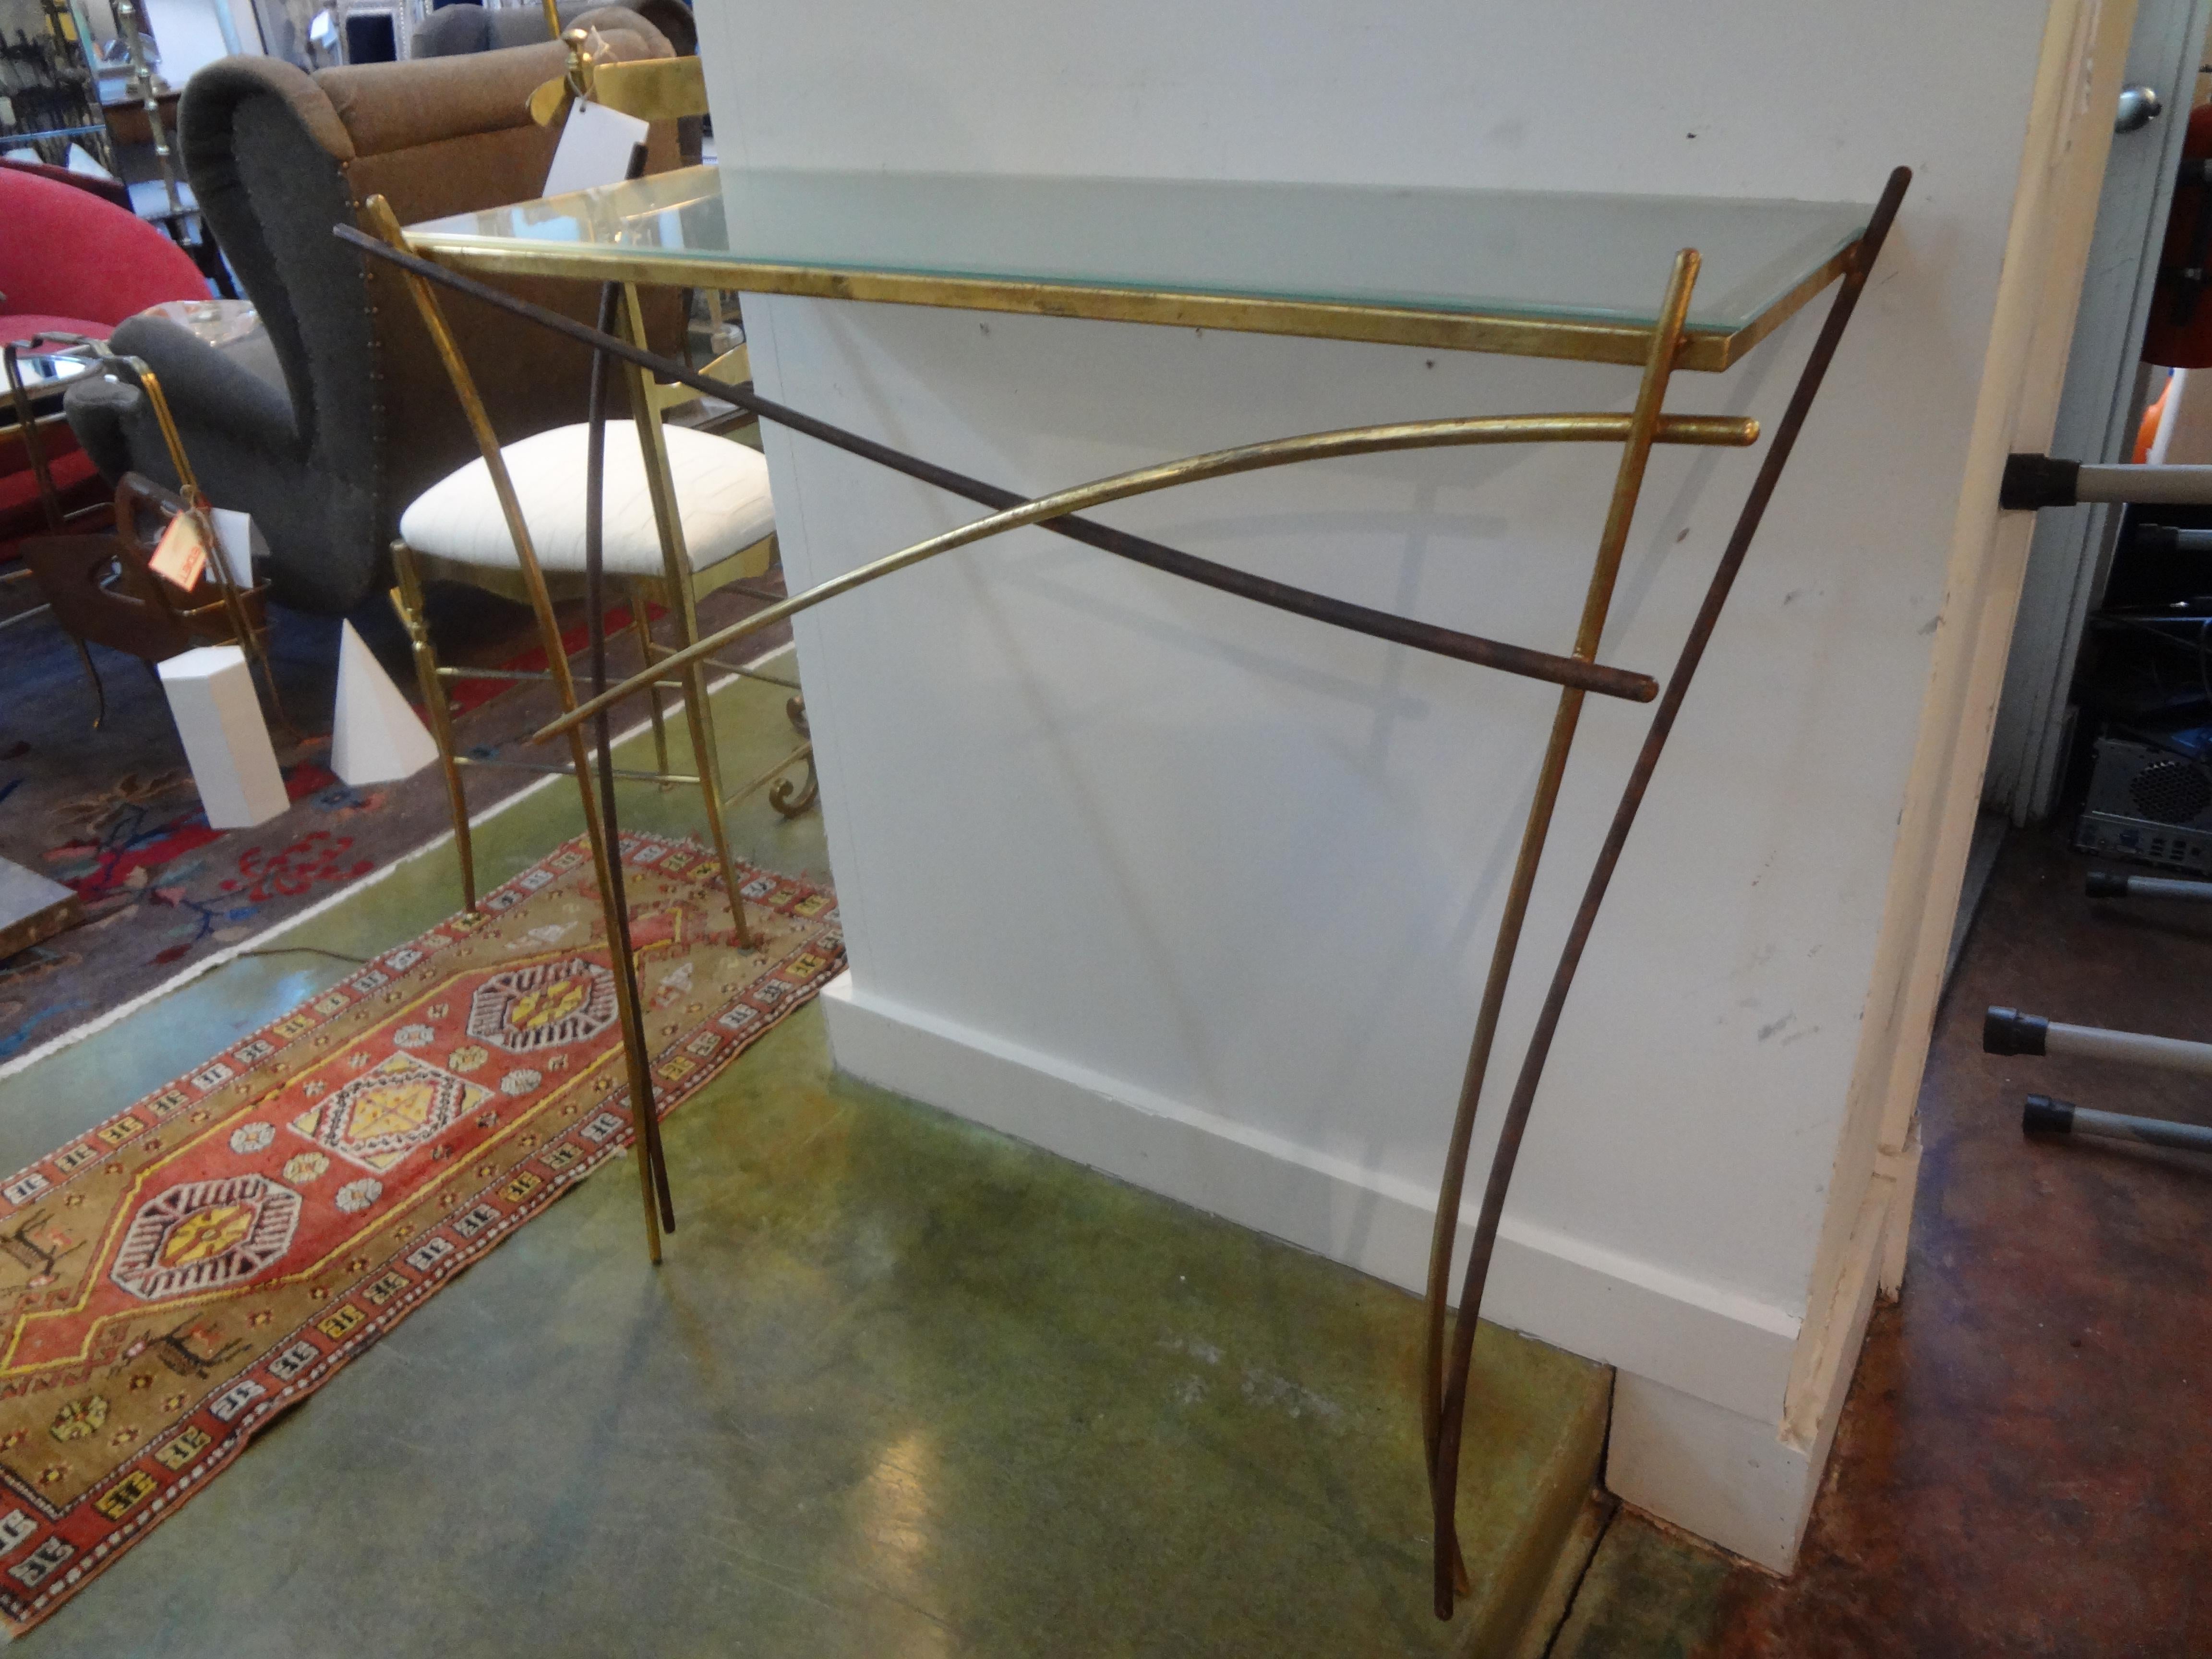 Unusual Italian midcentury Minimalist gilt iron console table with glass top in the style of Gio Ponti. This stunning Postmodern console is wall-mounted and perfect for an area where depth is of concern.